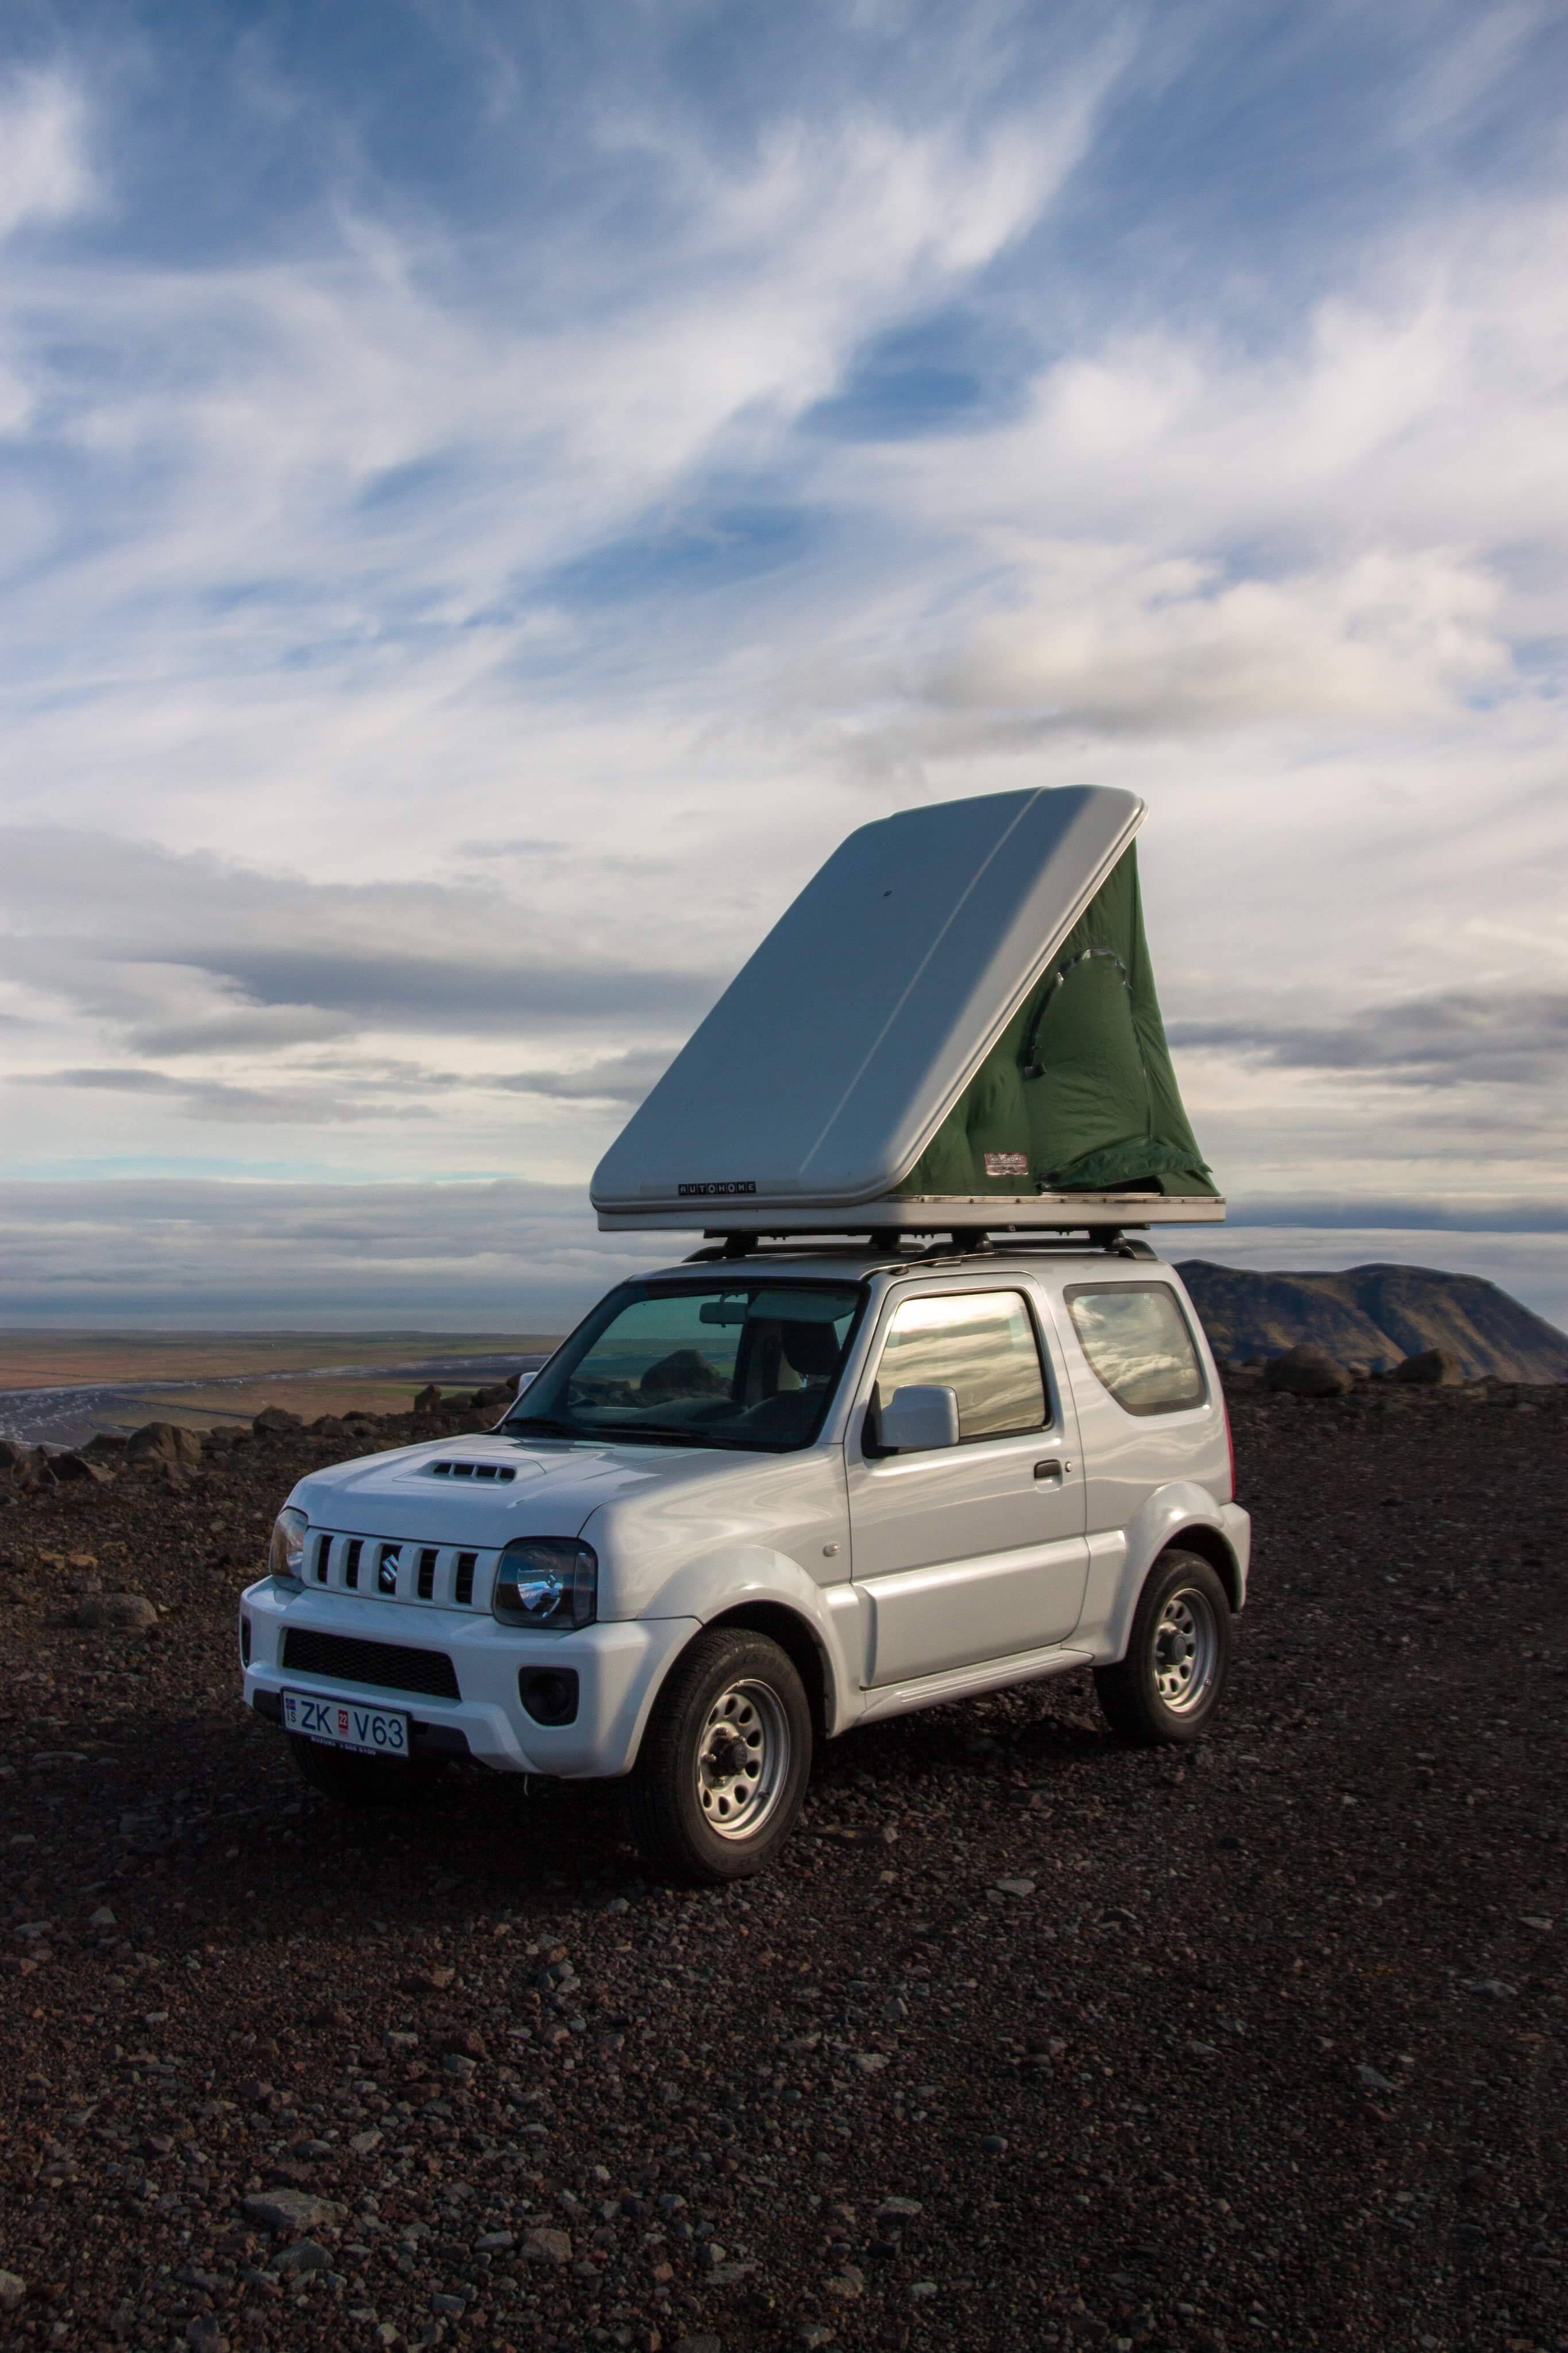 New Suzuki Jimny with Roof Tent in Iceland